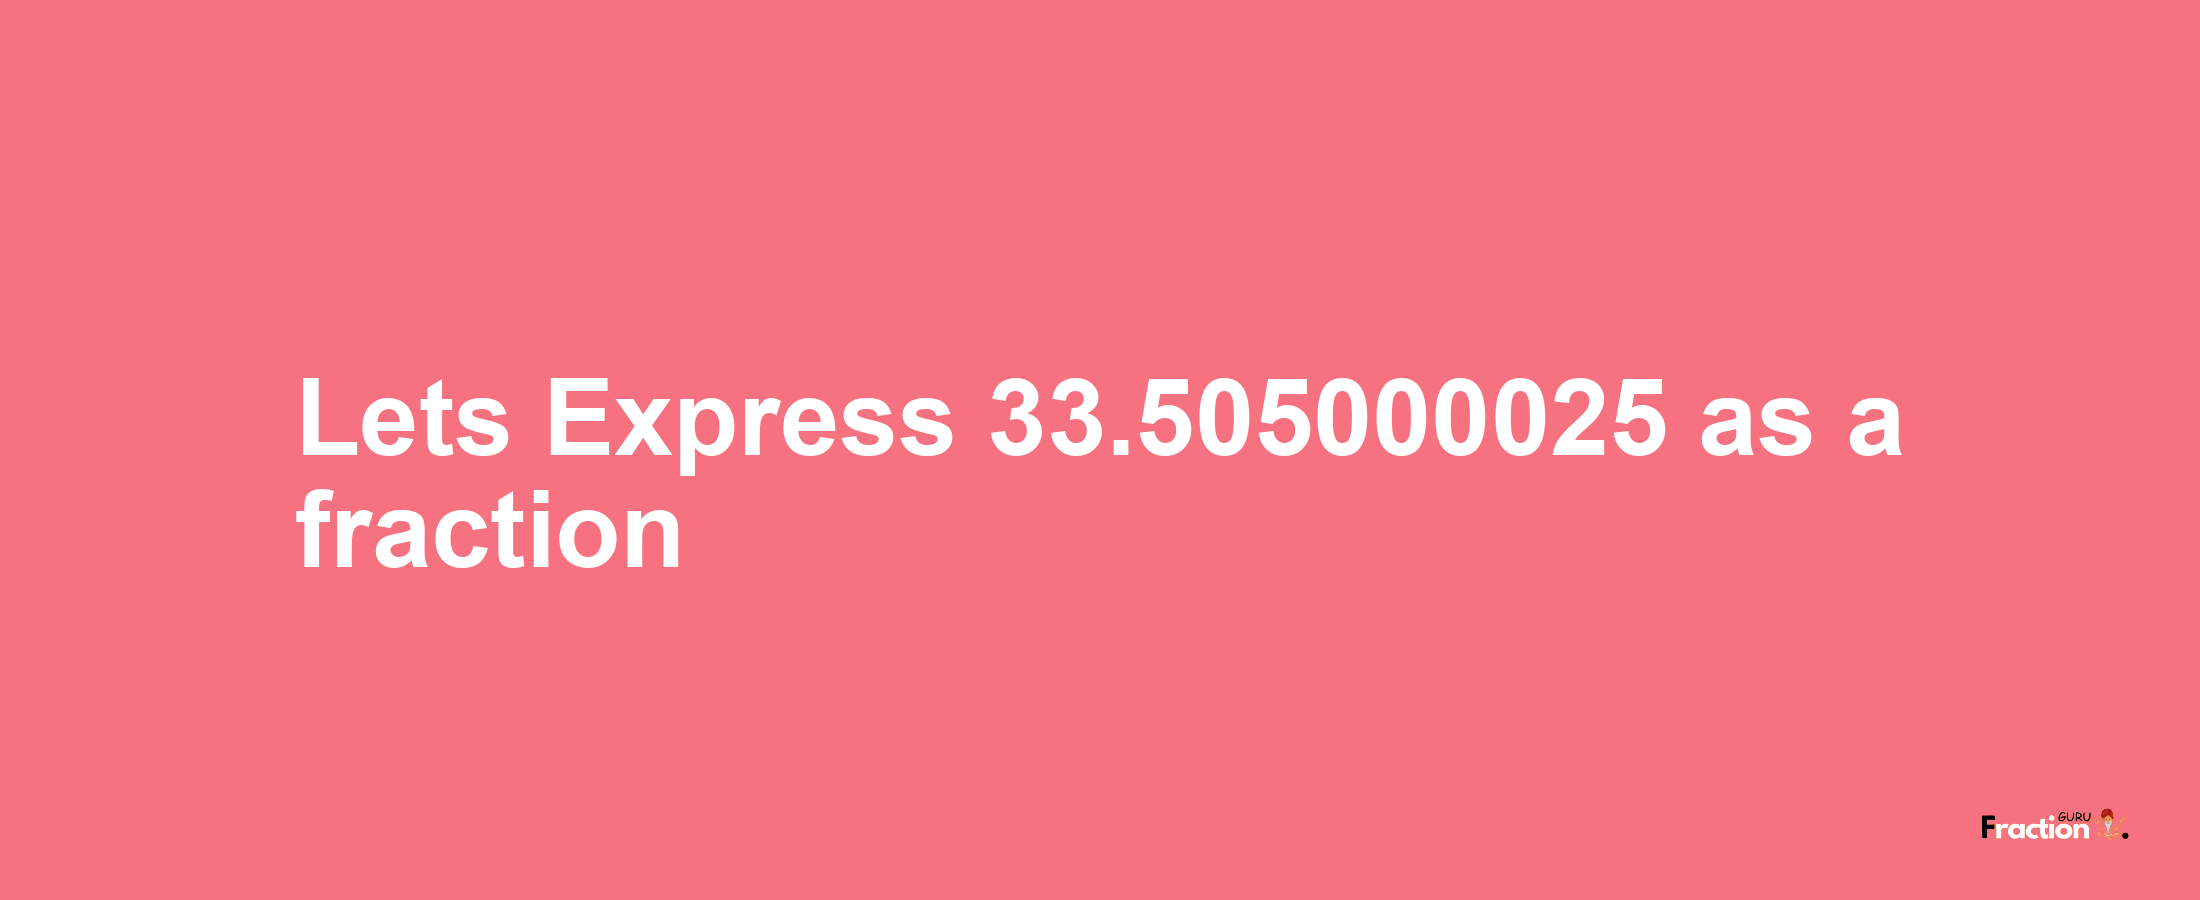 Lets Express 33.505000025 as afraction